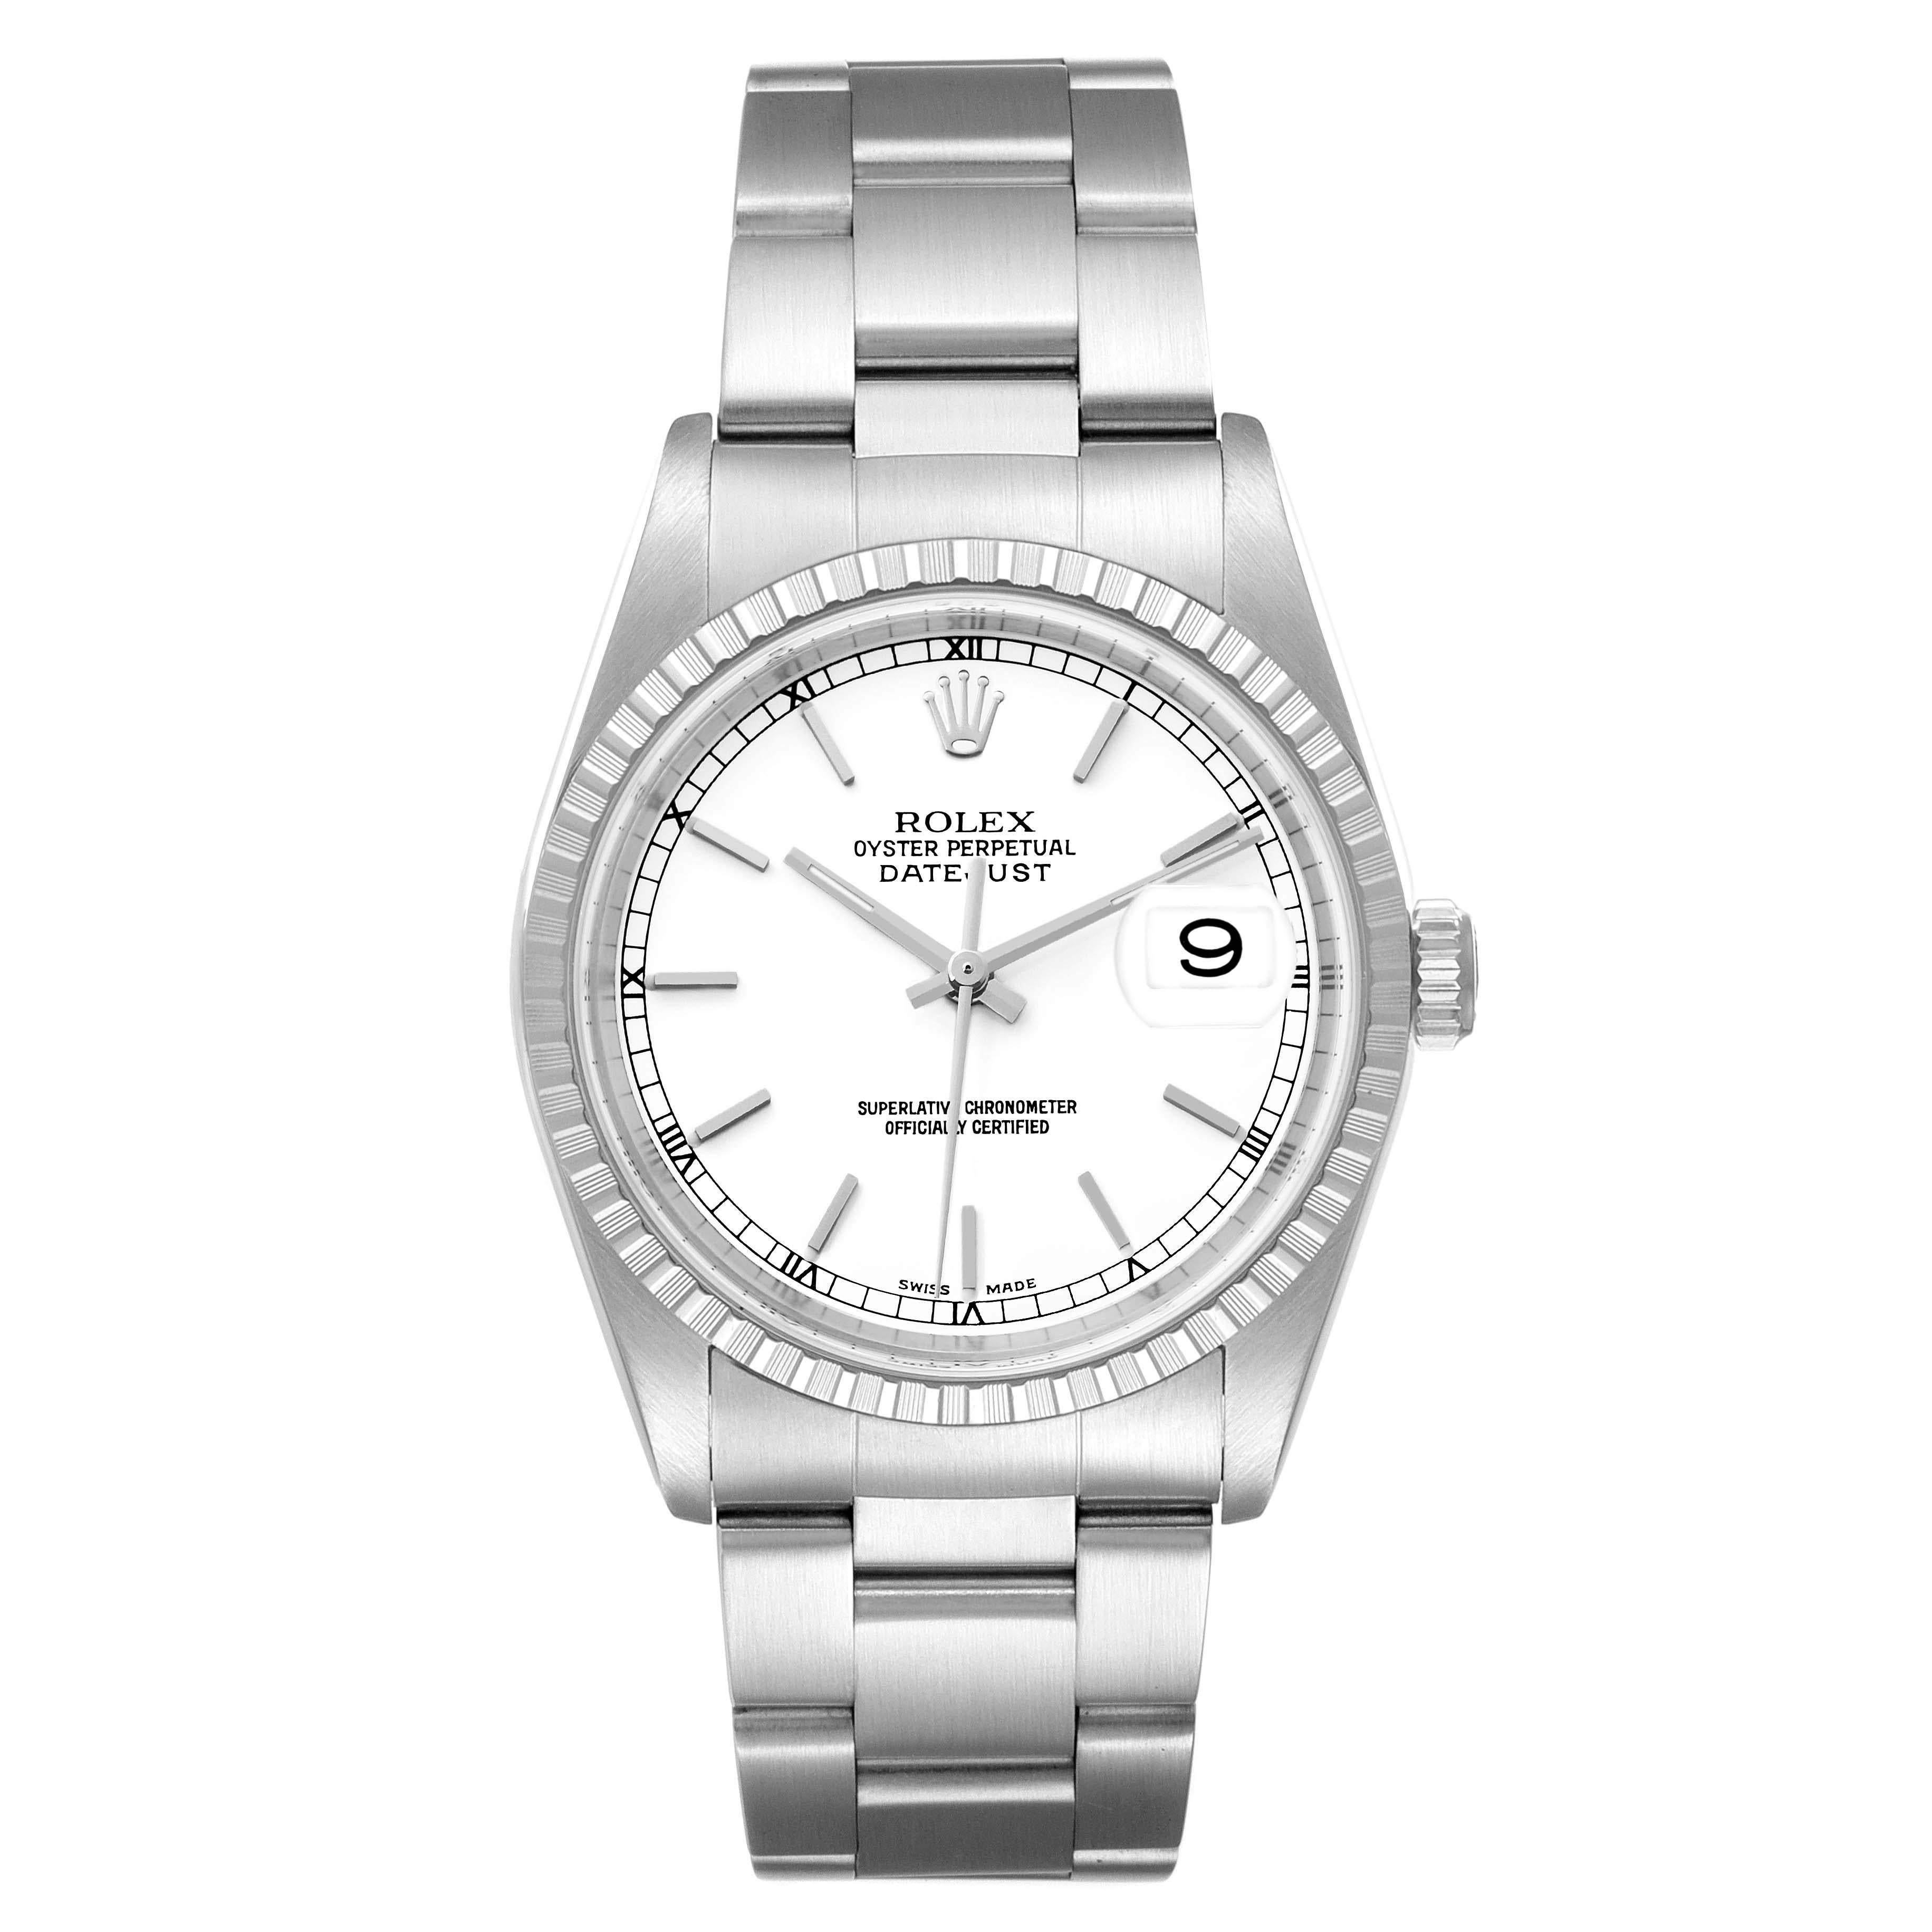 Rolex Datejust White Dial Engine Turned Bezel Steel Mens Watch 16220 Box Papers. Officially certified chronometer automatic self-winding movement. Stainless steel oyster case 36.0 mm in diameter. Rolex logo on the crown. Stainless steel engine